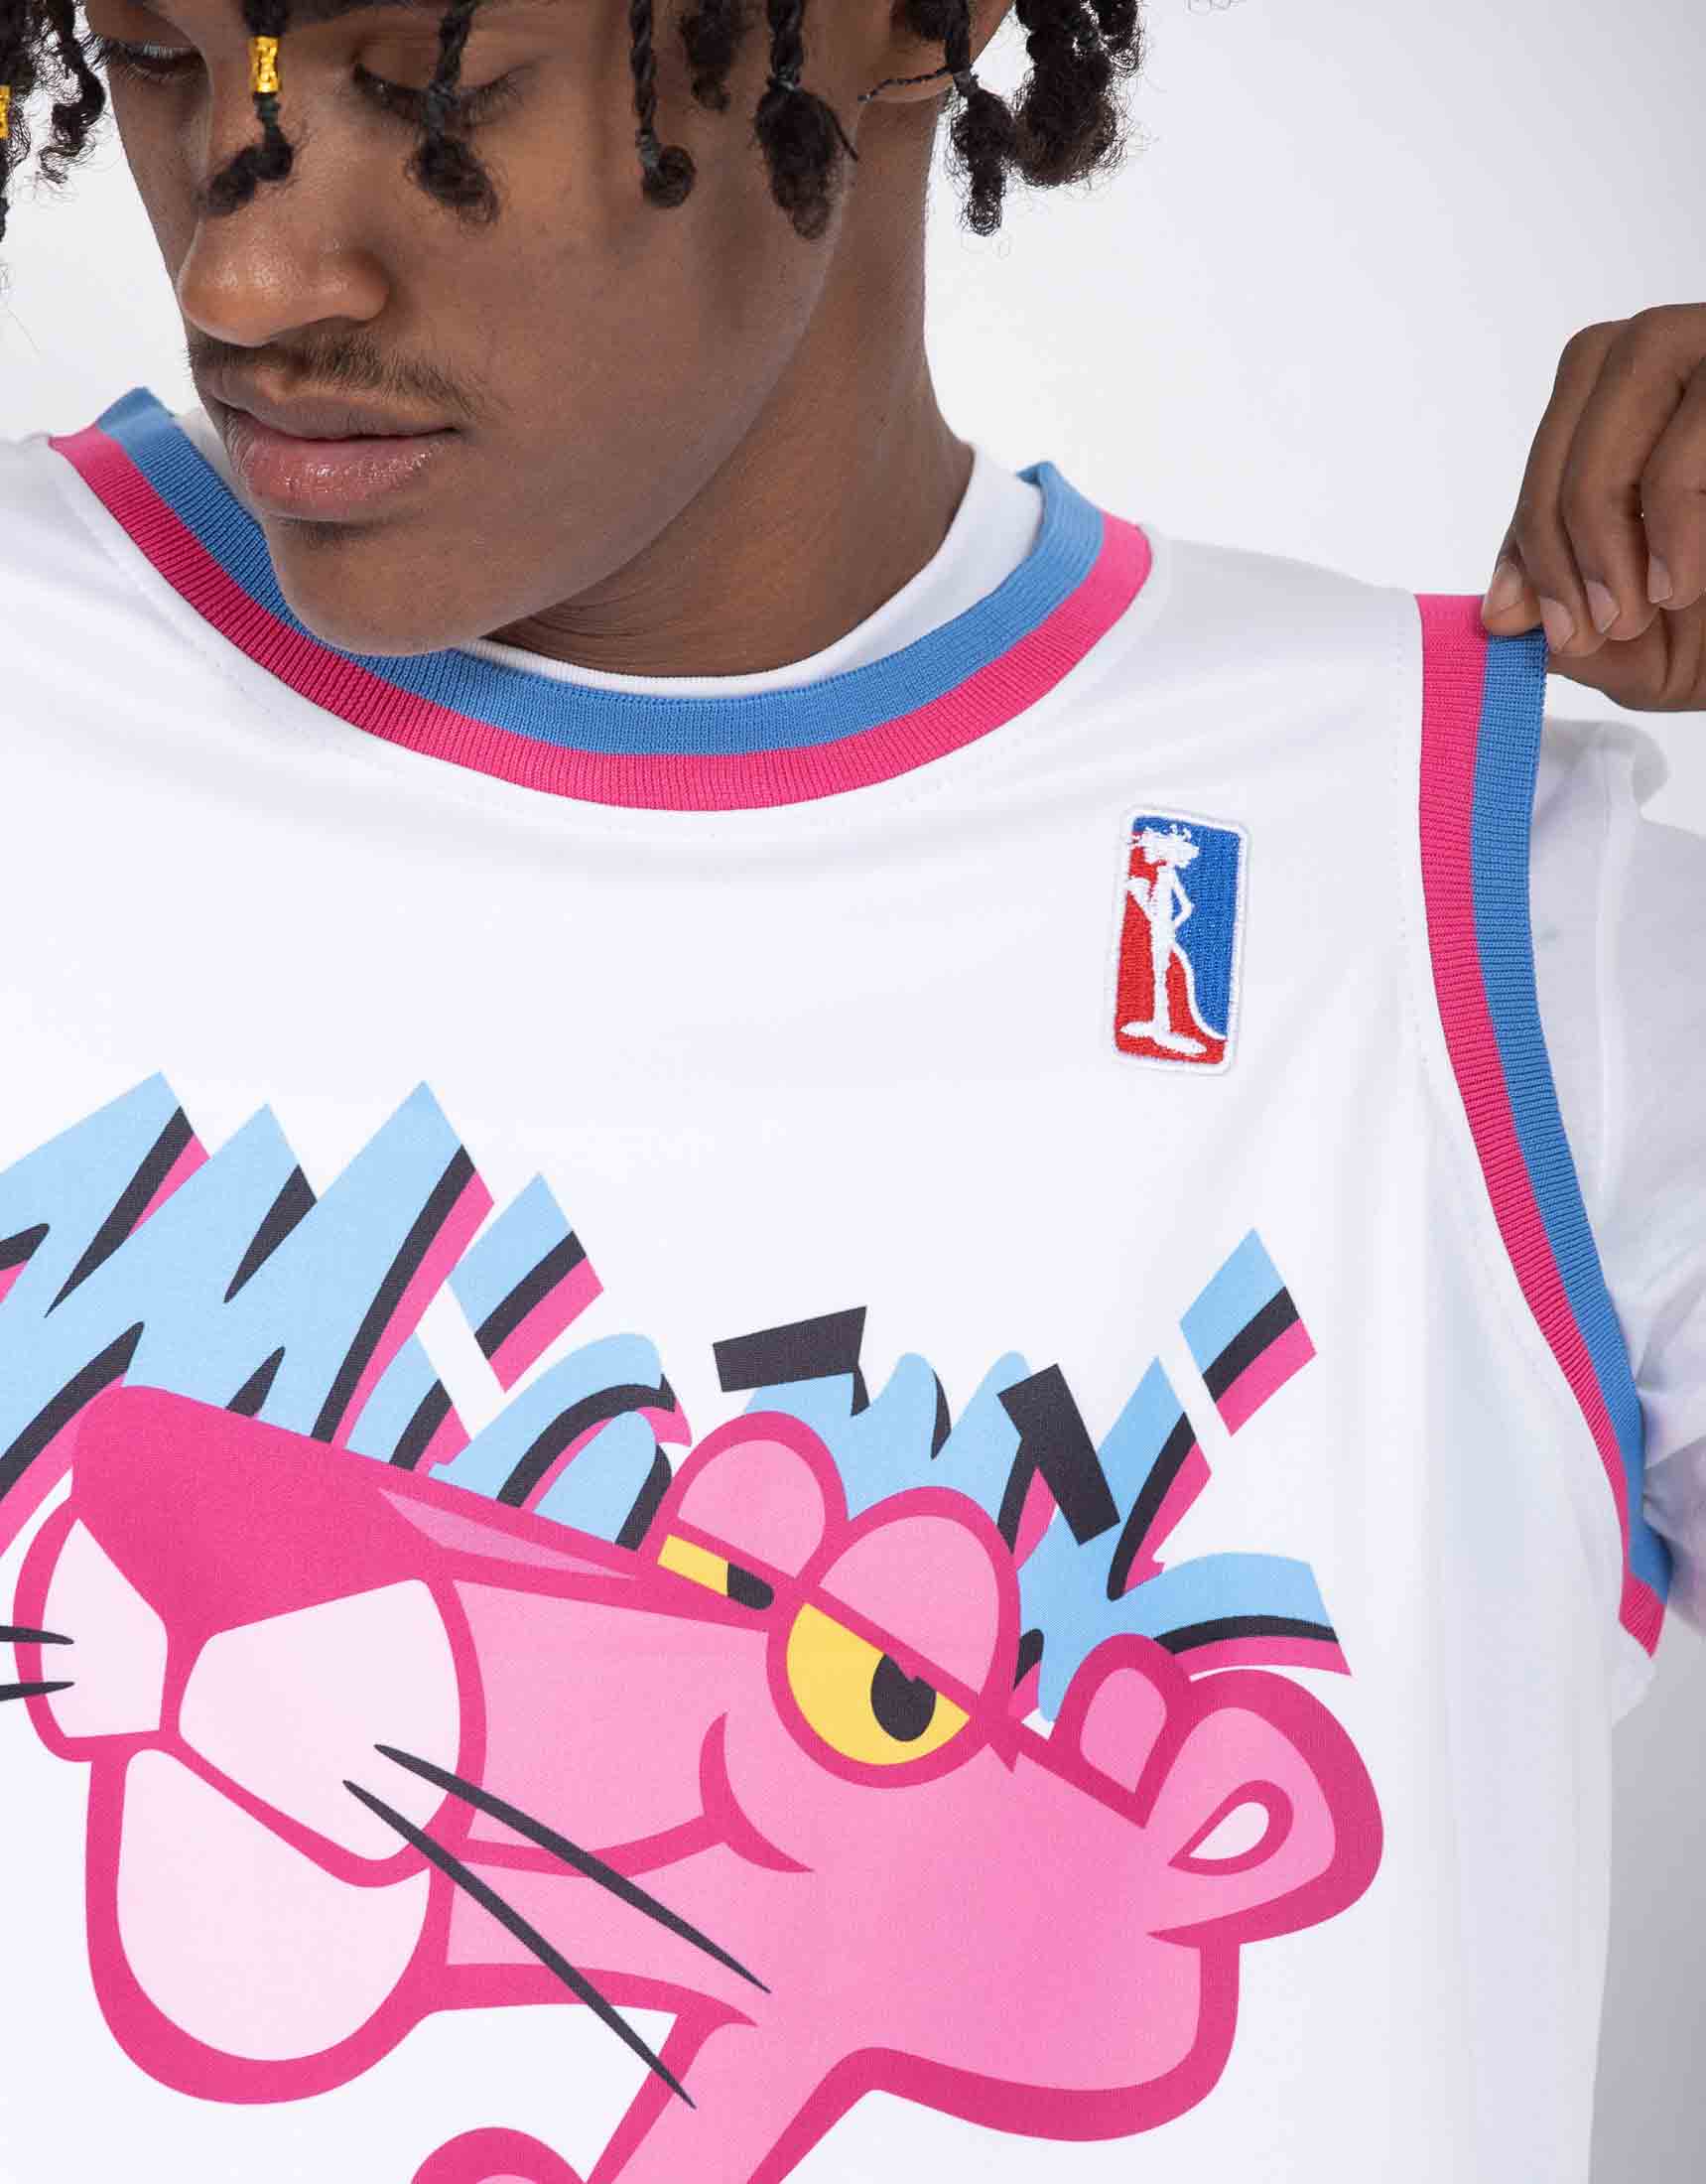 Pink Panther 1963 Miami Vice Basketball Jersey - LIMITED EDITION